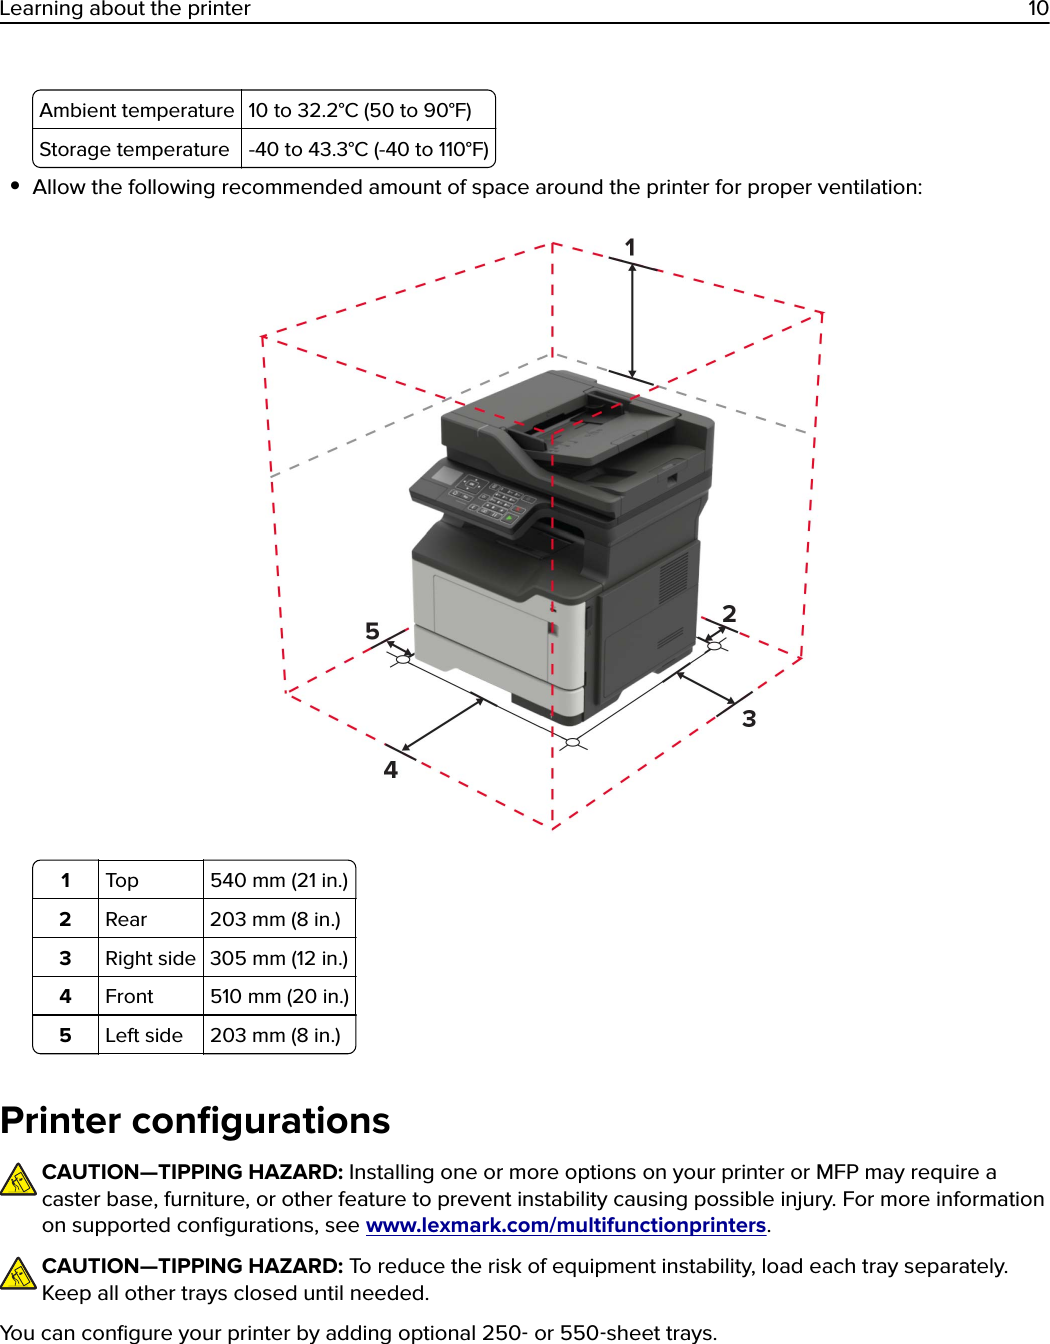 Ambient temperature 10 to 32.2°C (50 to 90°F)Storage temperature -40 to 43.3°C (-40 to 110°F)•Allow the following recommended amount of space around the printer for proper ventilation:1Top 540 mm (21 in.)2Rear 203 mm (8 in.)3Right side 305 mm (12 in.)4Front 510 mm (20 in.)5Left side 203 mm (8 in.)Printer conﬁgurationsCAUTION—TIPPING HAZARD: Installing one or more options on your printer or MFP may require acaster base, furniture, or other feature to prevent instability causing possible injury. For more informationon supported conﬁgurations, see www.lexmark.com/multifunctionprinters.CAUTION—TIPPING HAZARD: To reduce the risk of equipment instability, load each tray separately.Keep all other trays closed until needed.You can conﬁgure your printer by adding optional 250‑ or 550‑sheet trays.Learning about the printer 10